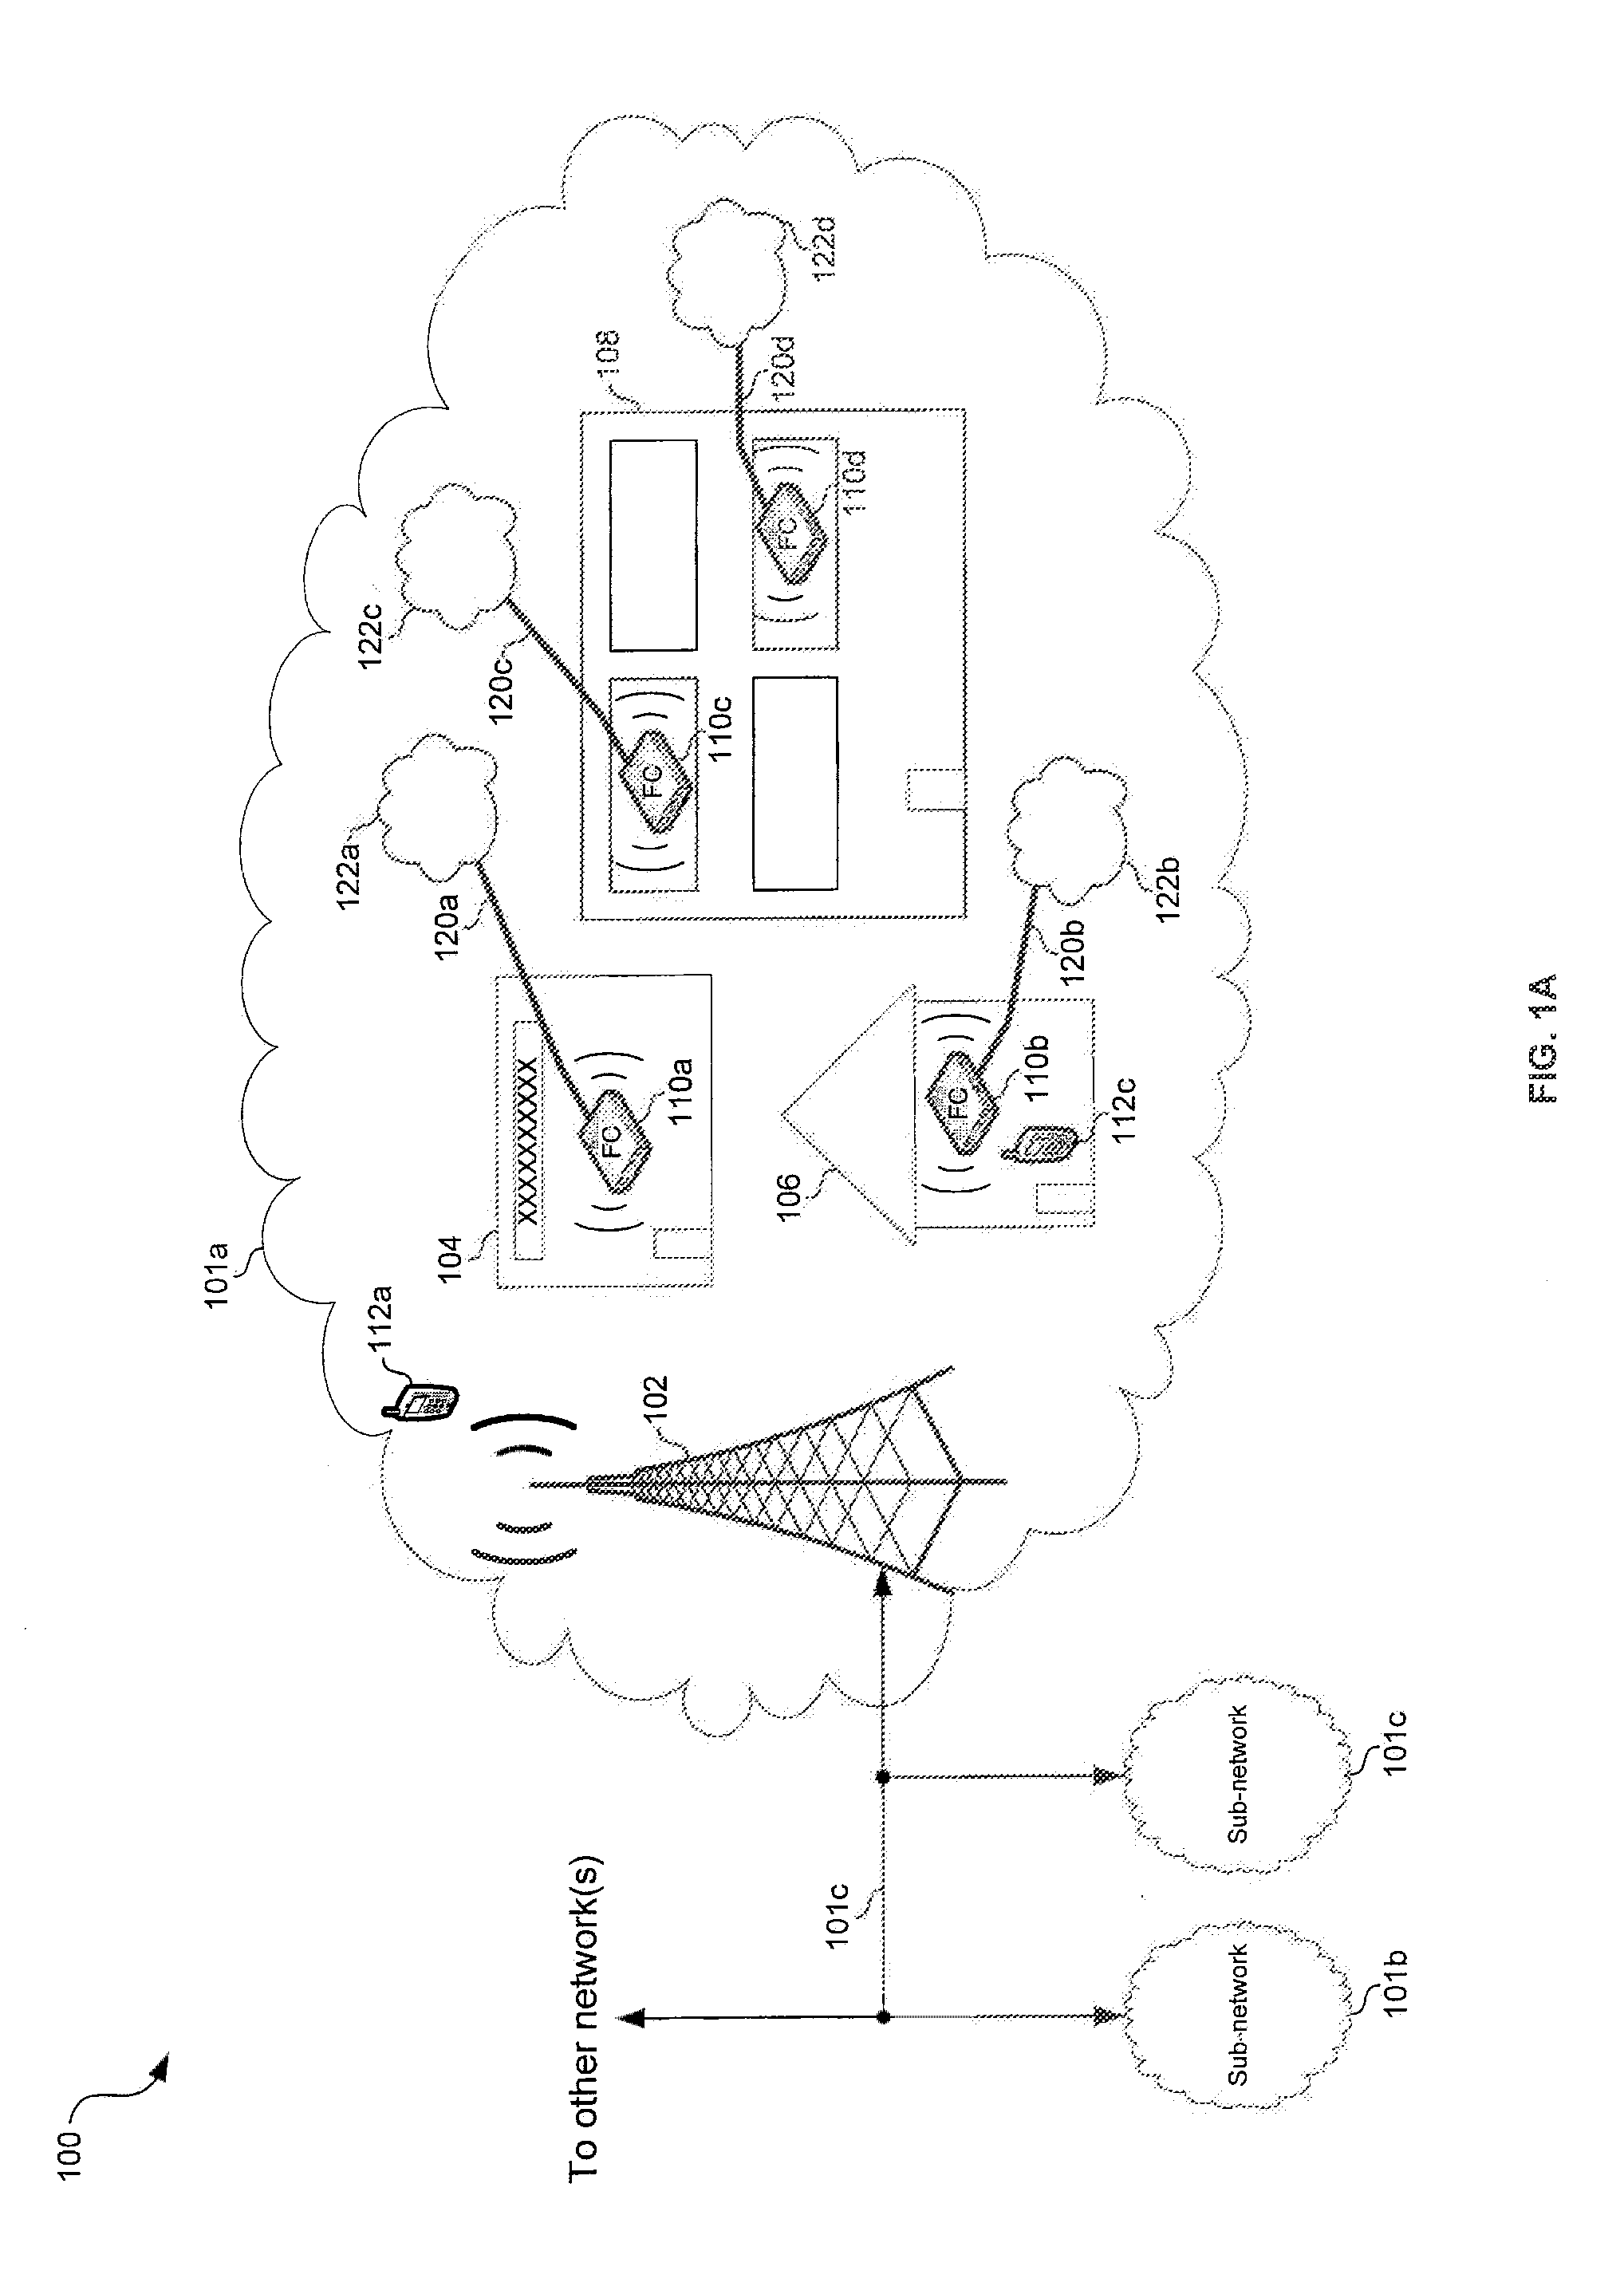 Method and System for Timely Delivery of Multimedia Content Via a Femtocell